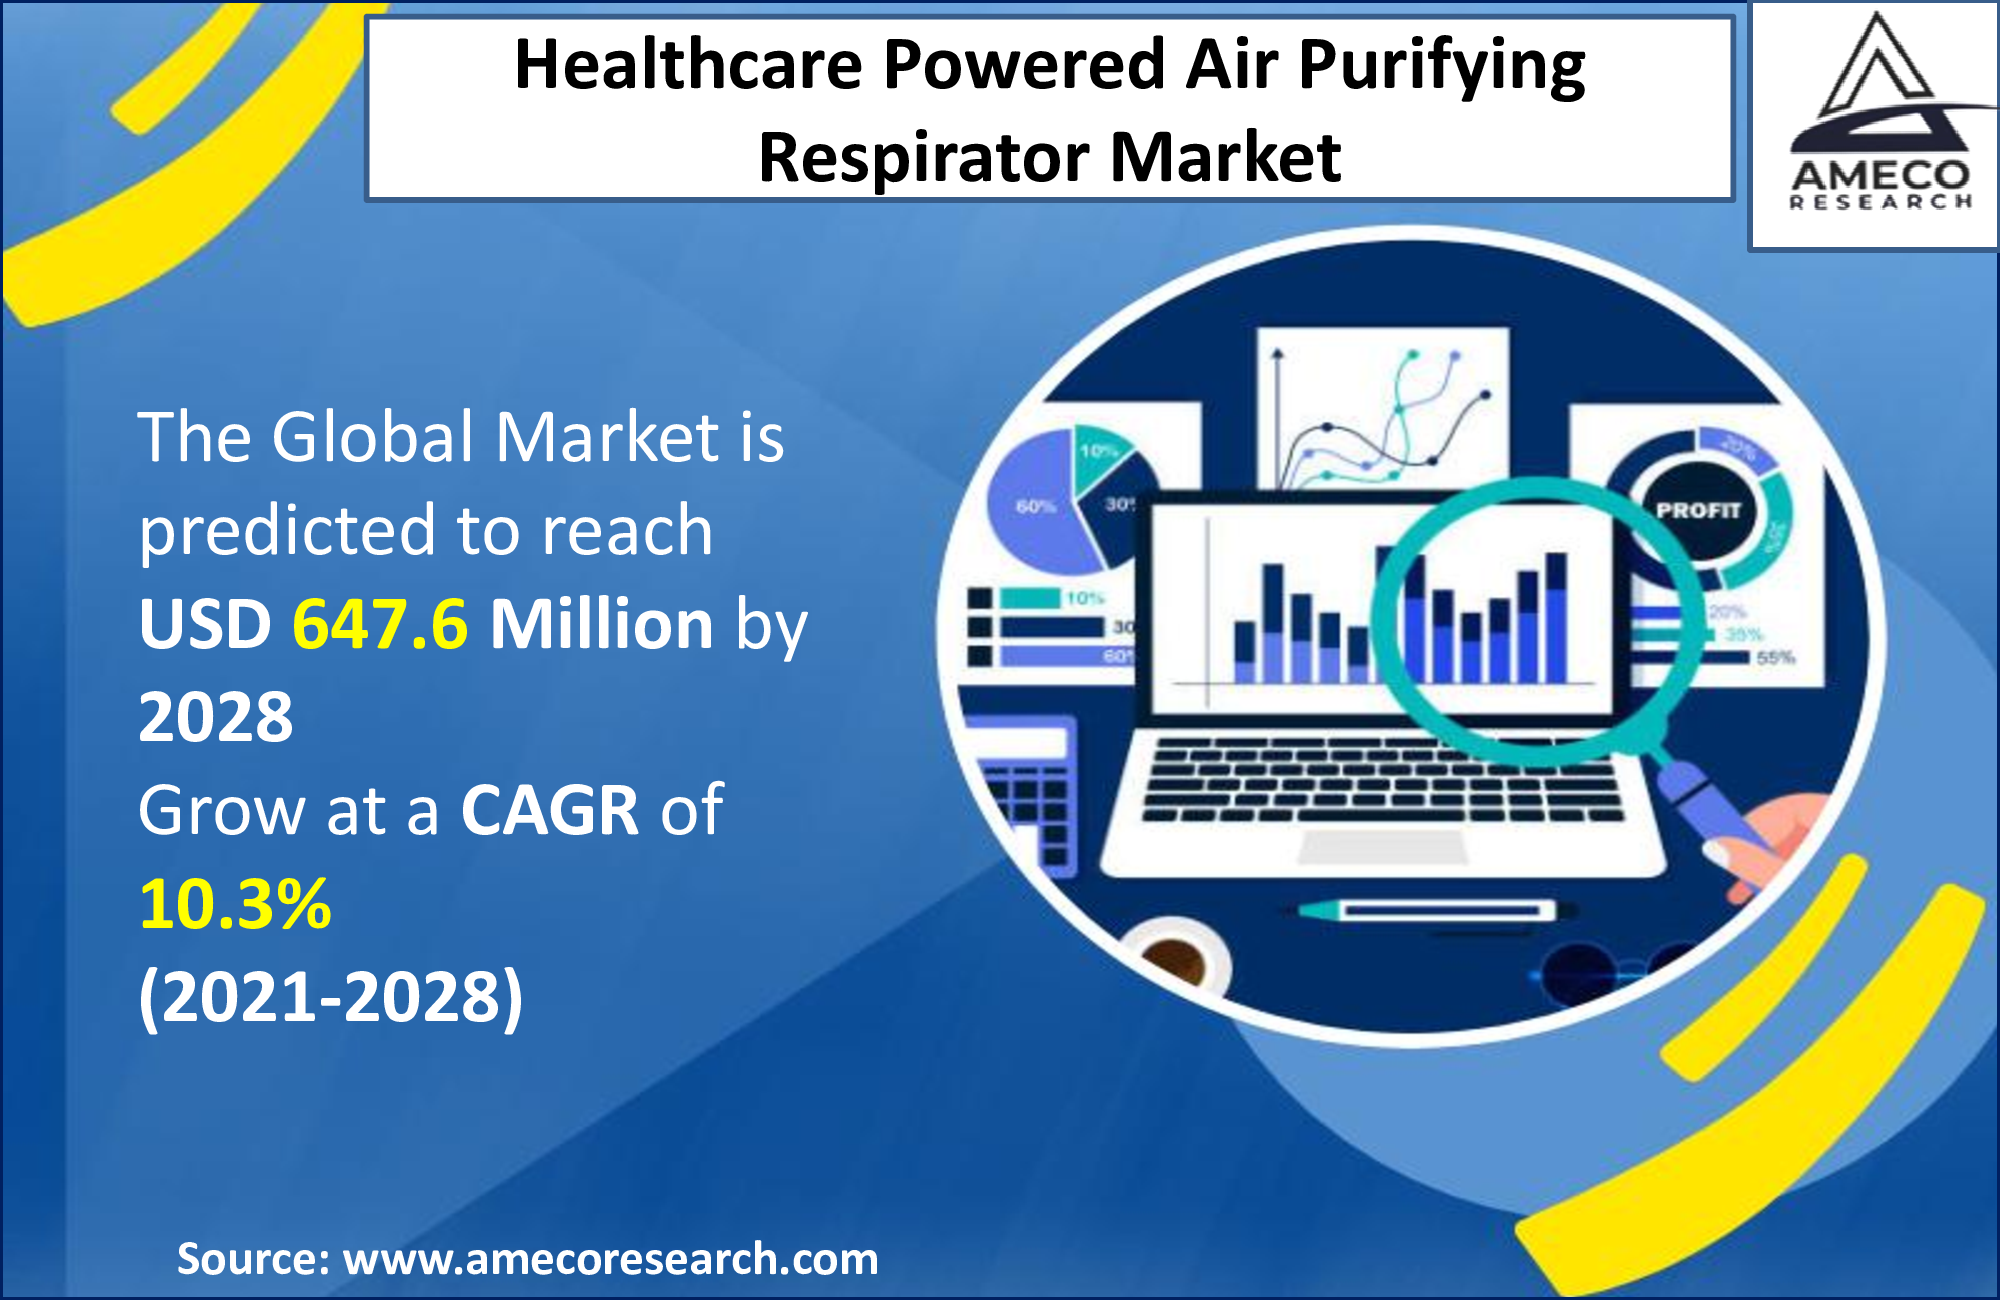 Healthcare Powered Air Purifying Respirator Market